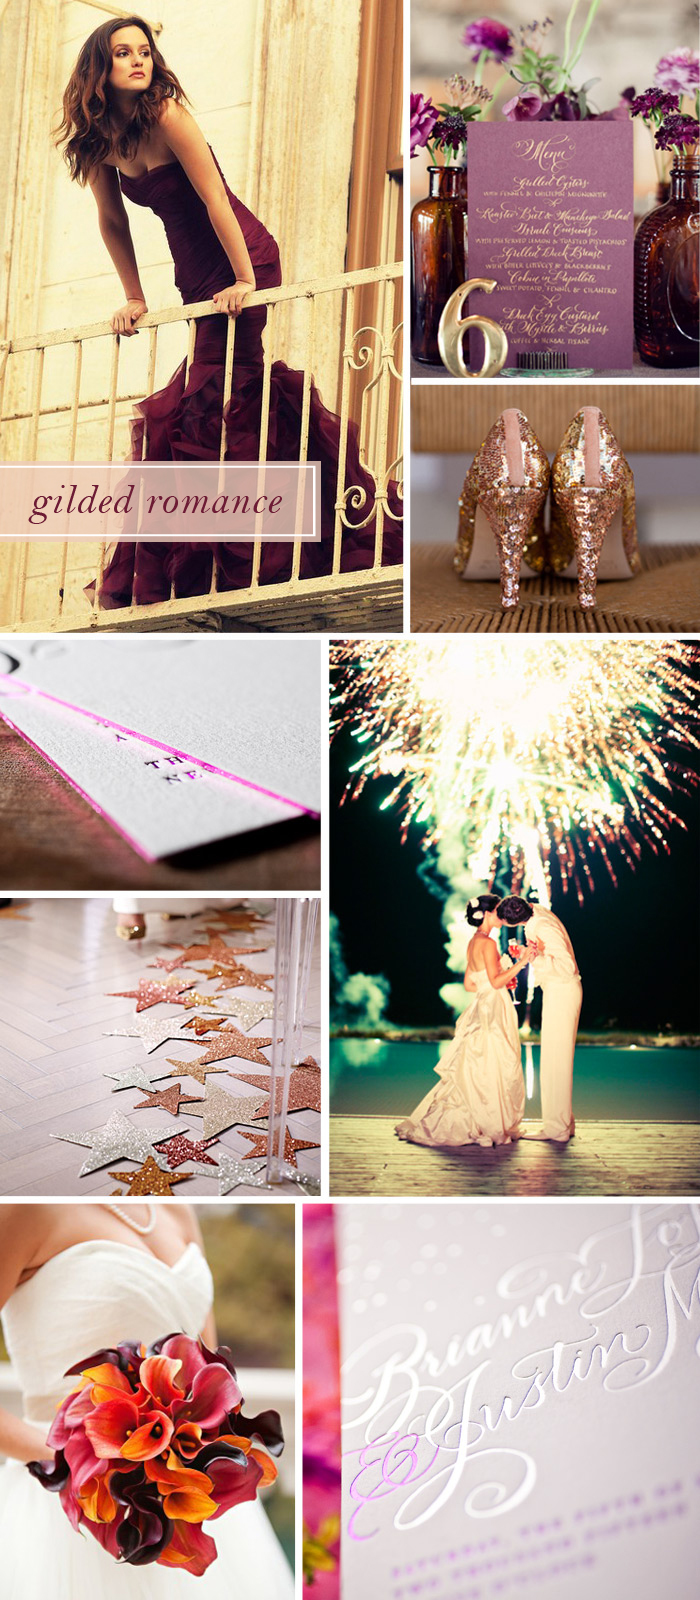 Sparkling shoes, a rich plum dress and glittering fireworks inspired Bella Figura's Gilded Romance design